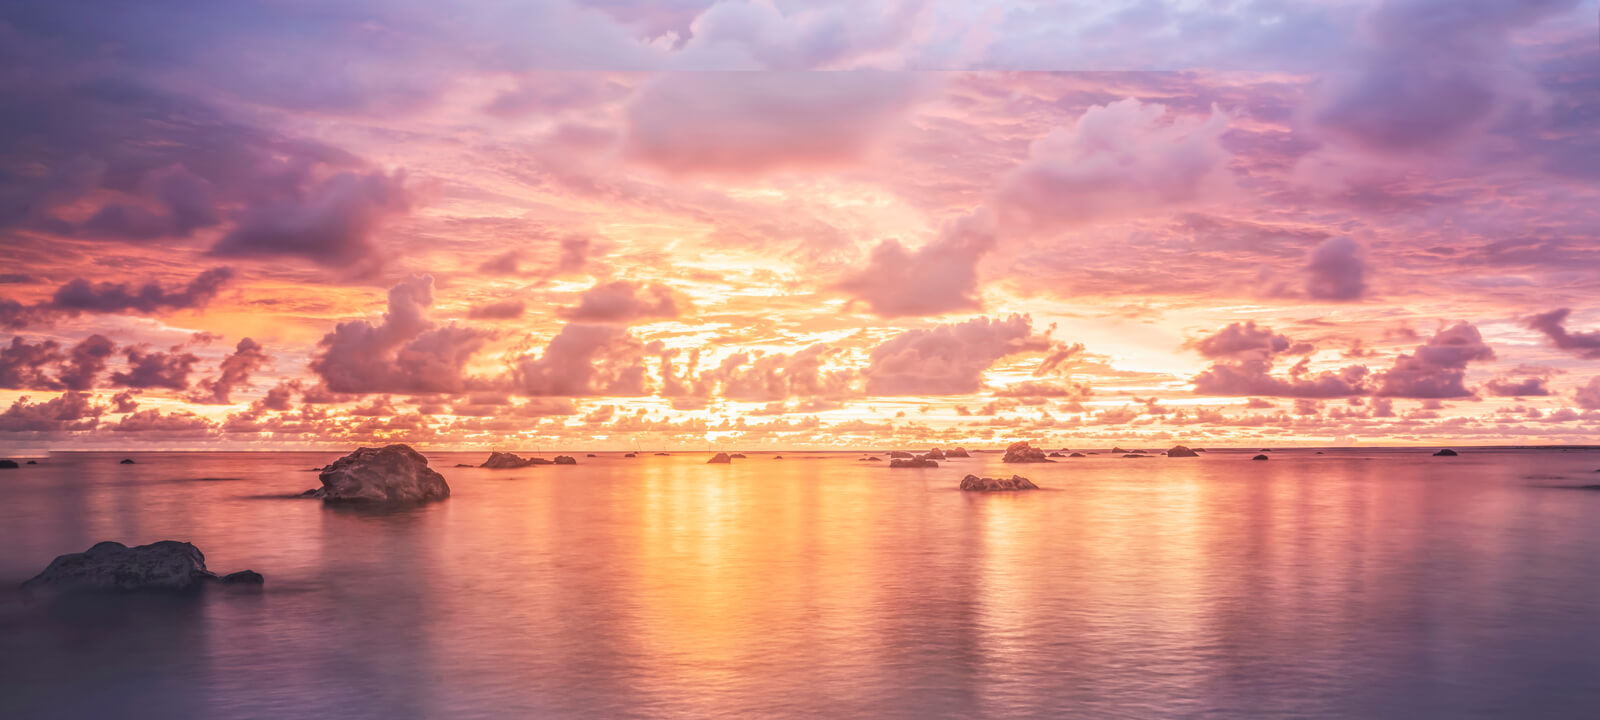 Dramatic Sky And Purple Sunset On The Sea In Thailand Phuket Kao